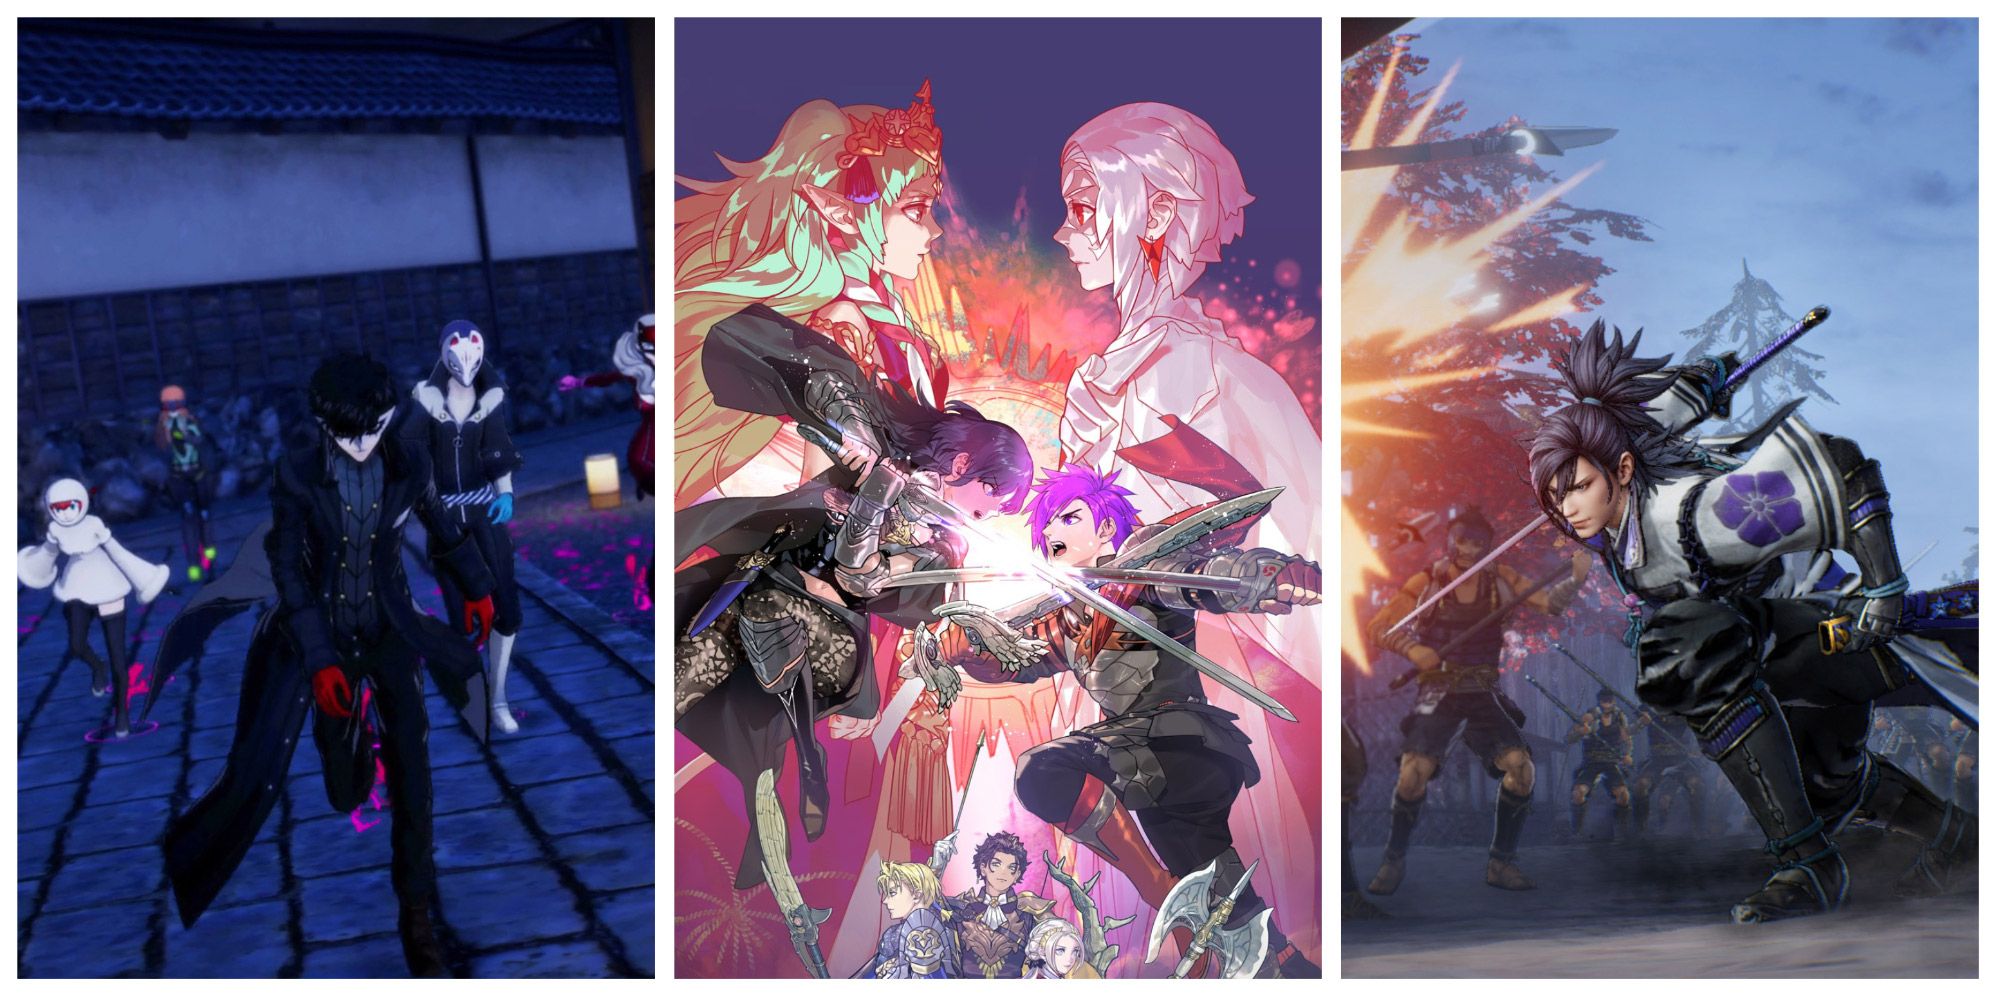 A collage showing gameplay and scenes from Persona 5 Strikers, Samurai Warriors 5, and Fire Emblem Warriors: Three Hopes